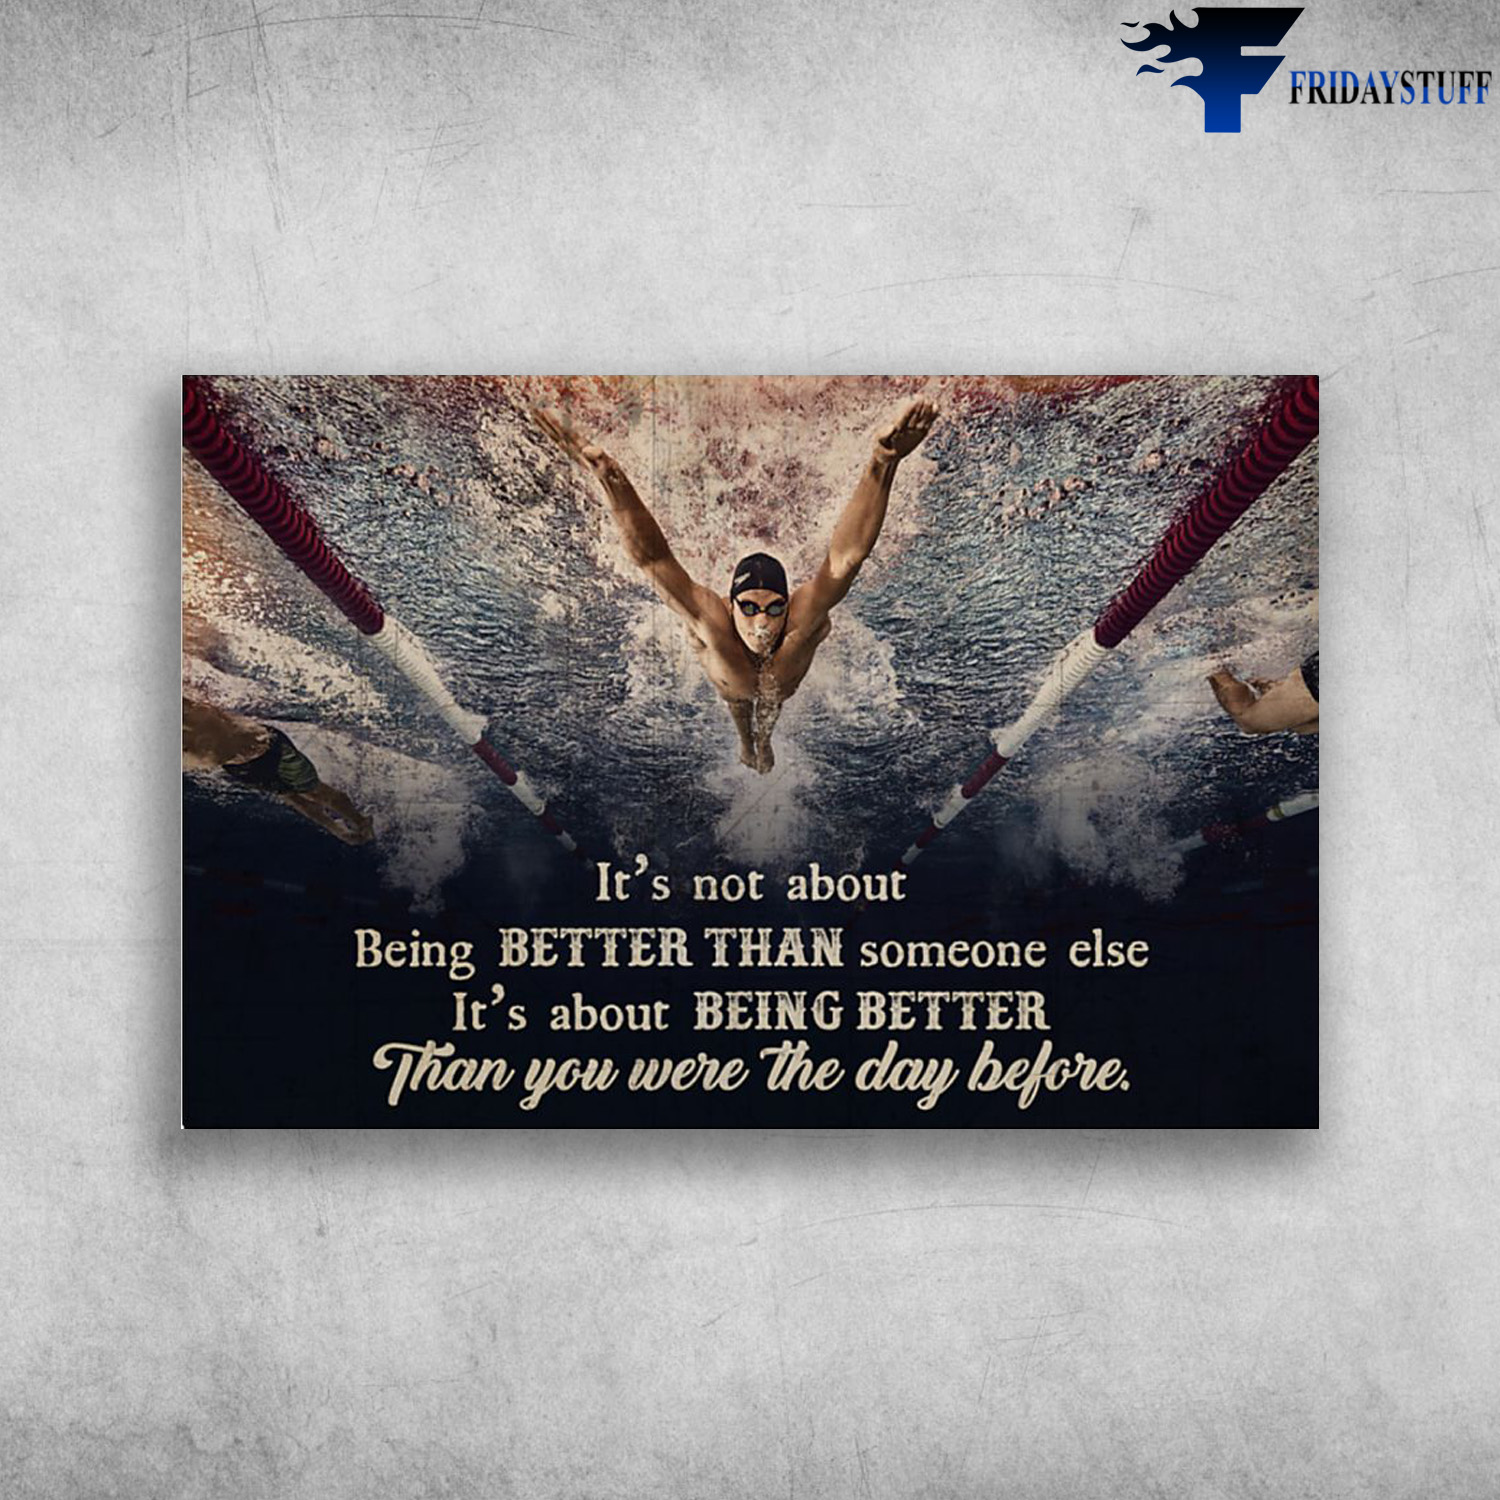 Swimming Athletes - It's Not About Being Better Than Someone Else, It's About Being Better Than You Were The Day Before